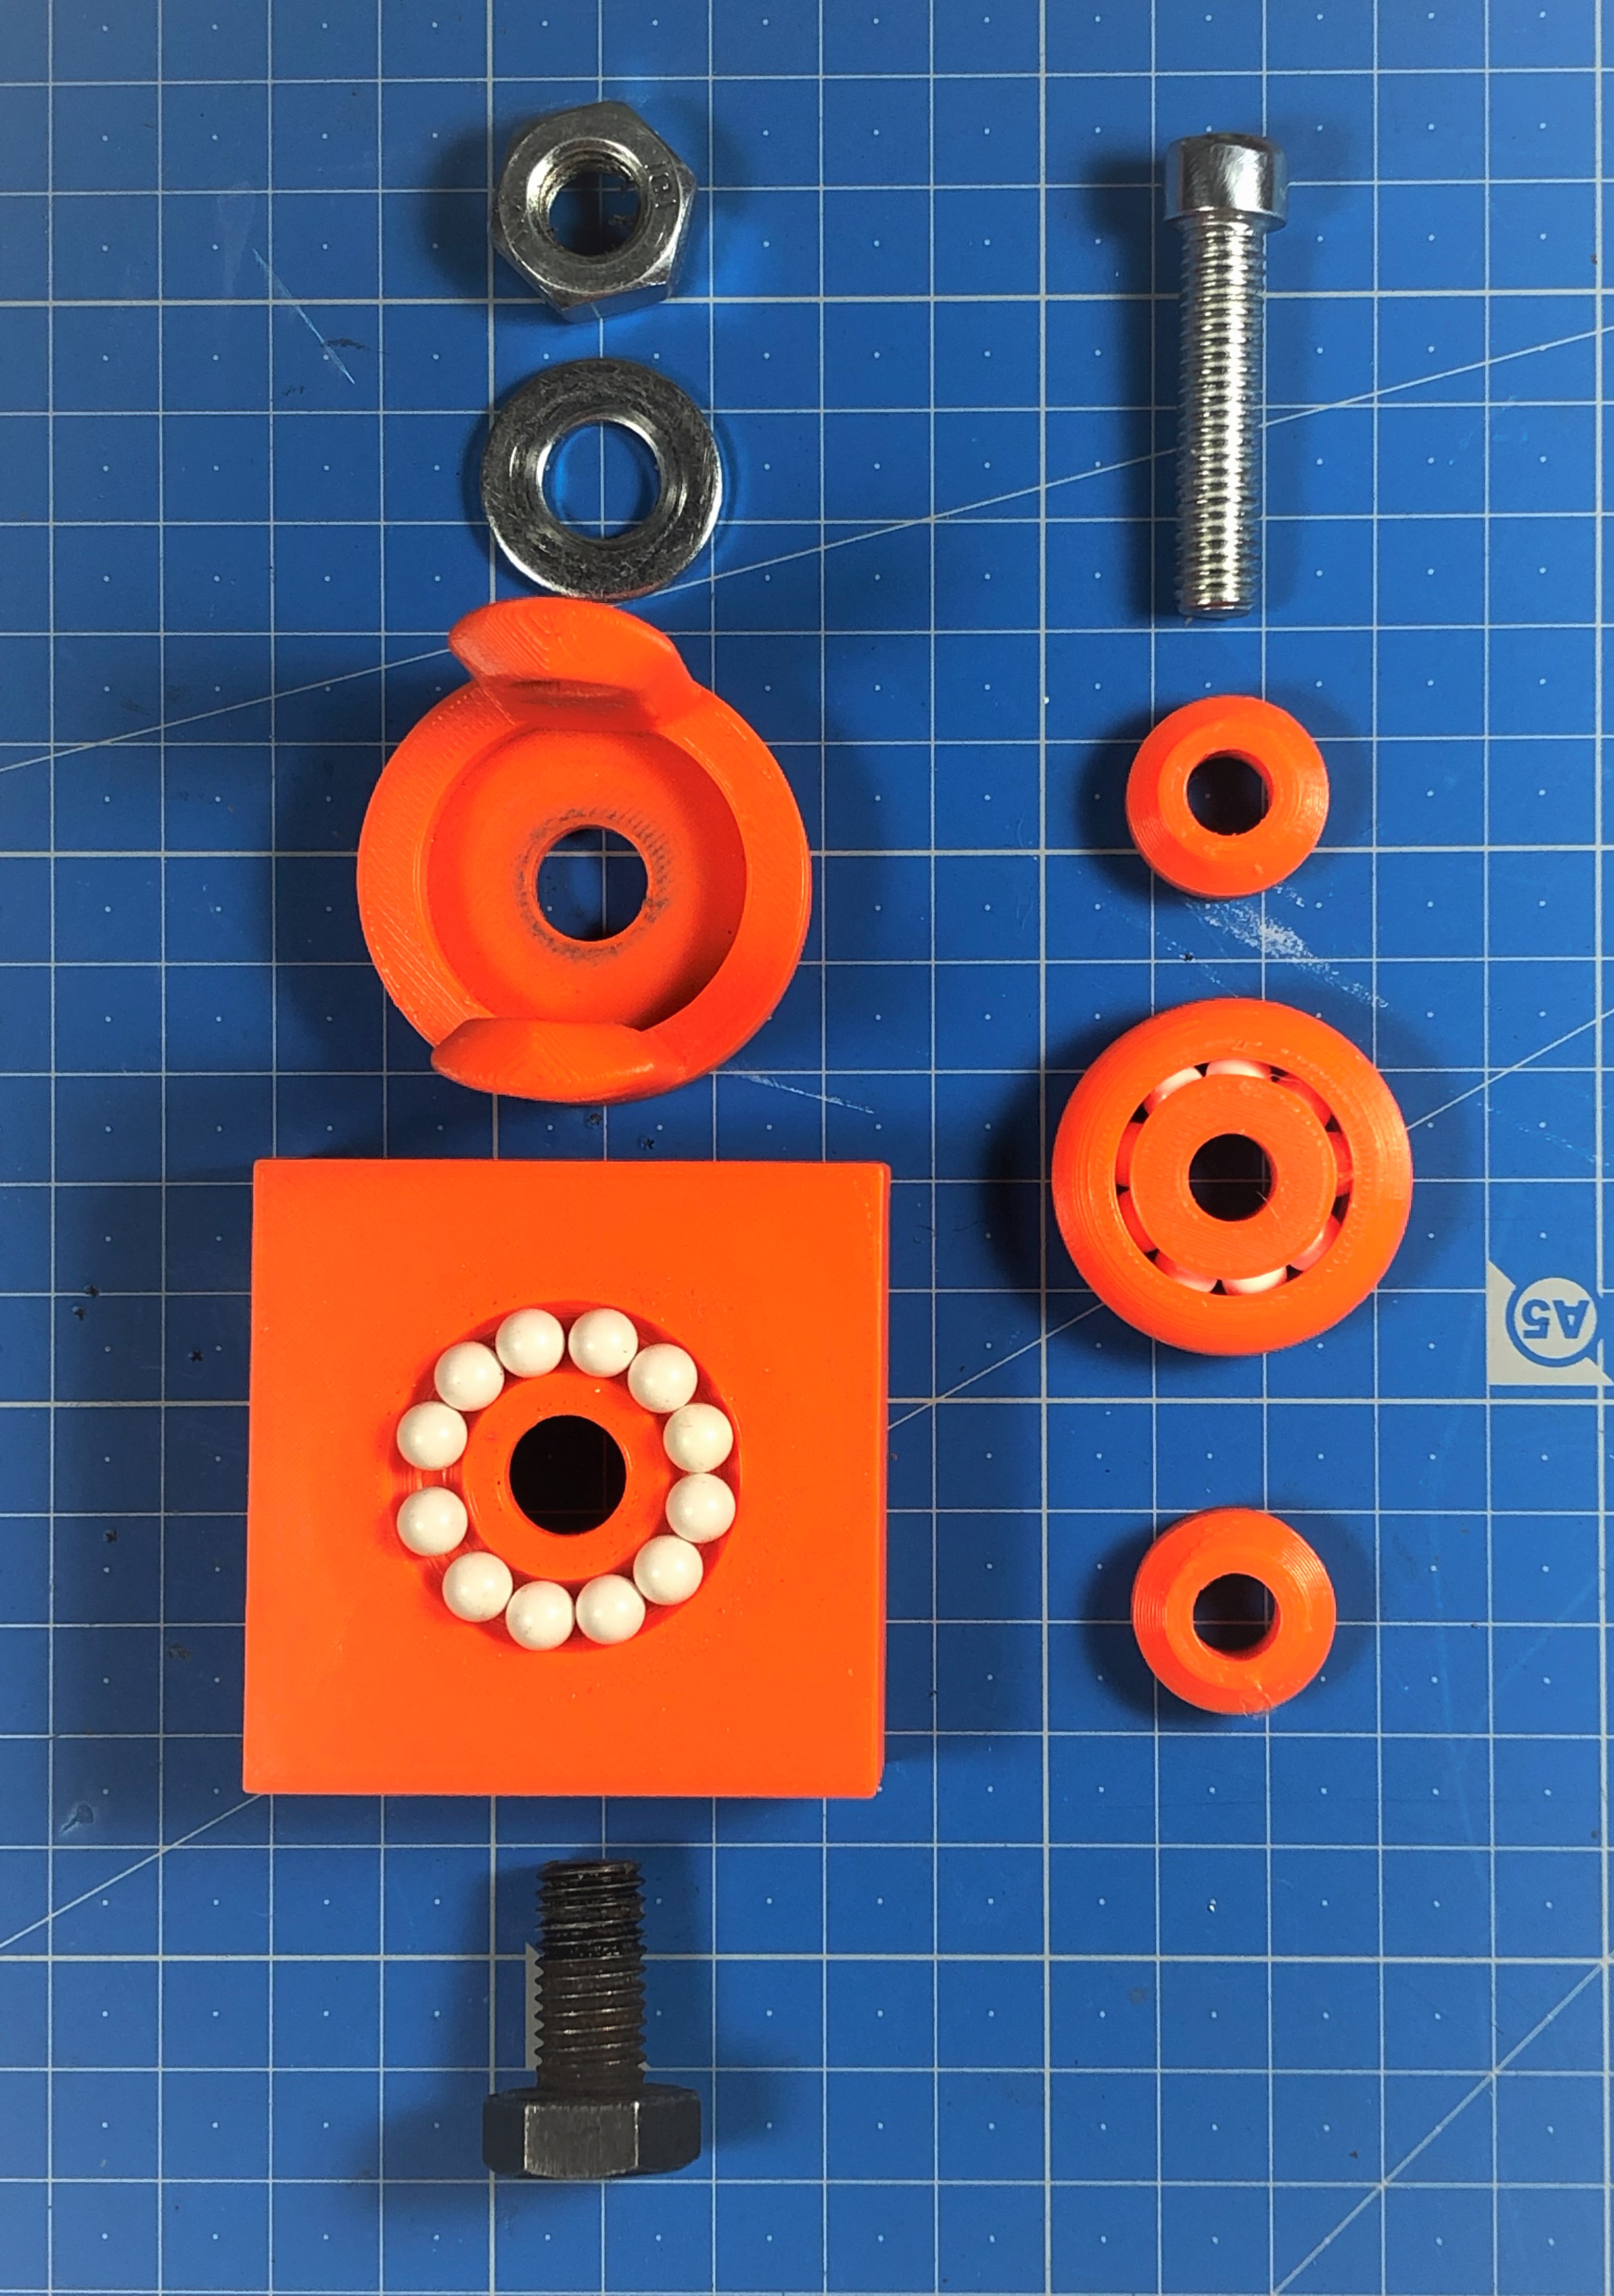 3D printed wheels for the Ikea LACK table